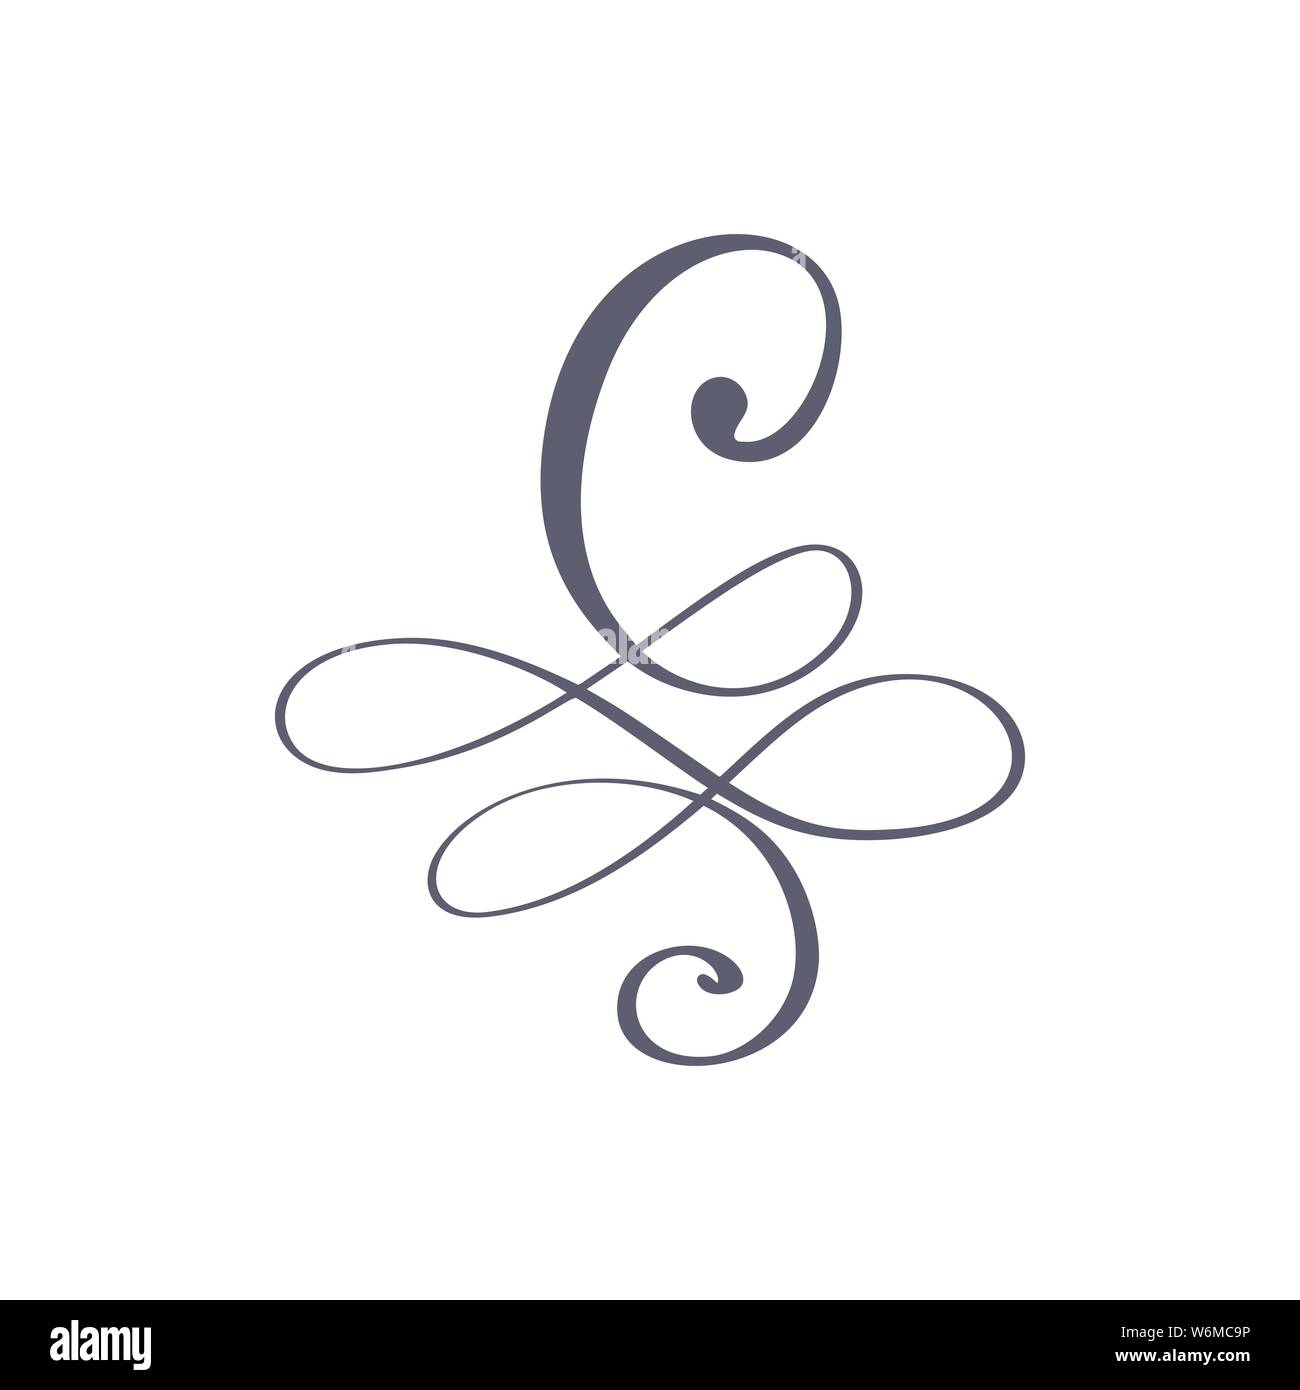 Vector Hand Drawn calligraphic floral C monogram or logo. Uppercase Hand Lettering Letter C with swirls and curl. Wedding Floral Design Stock Vector